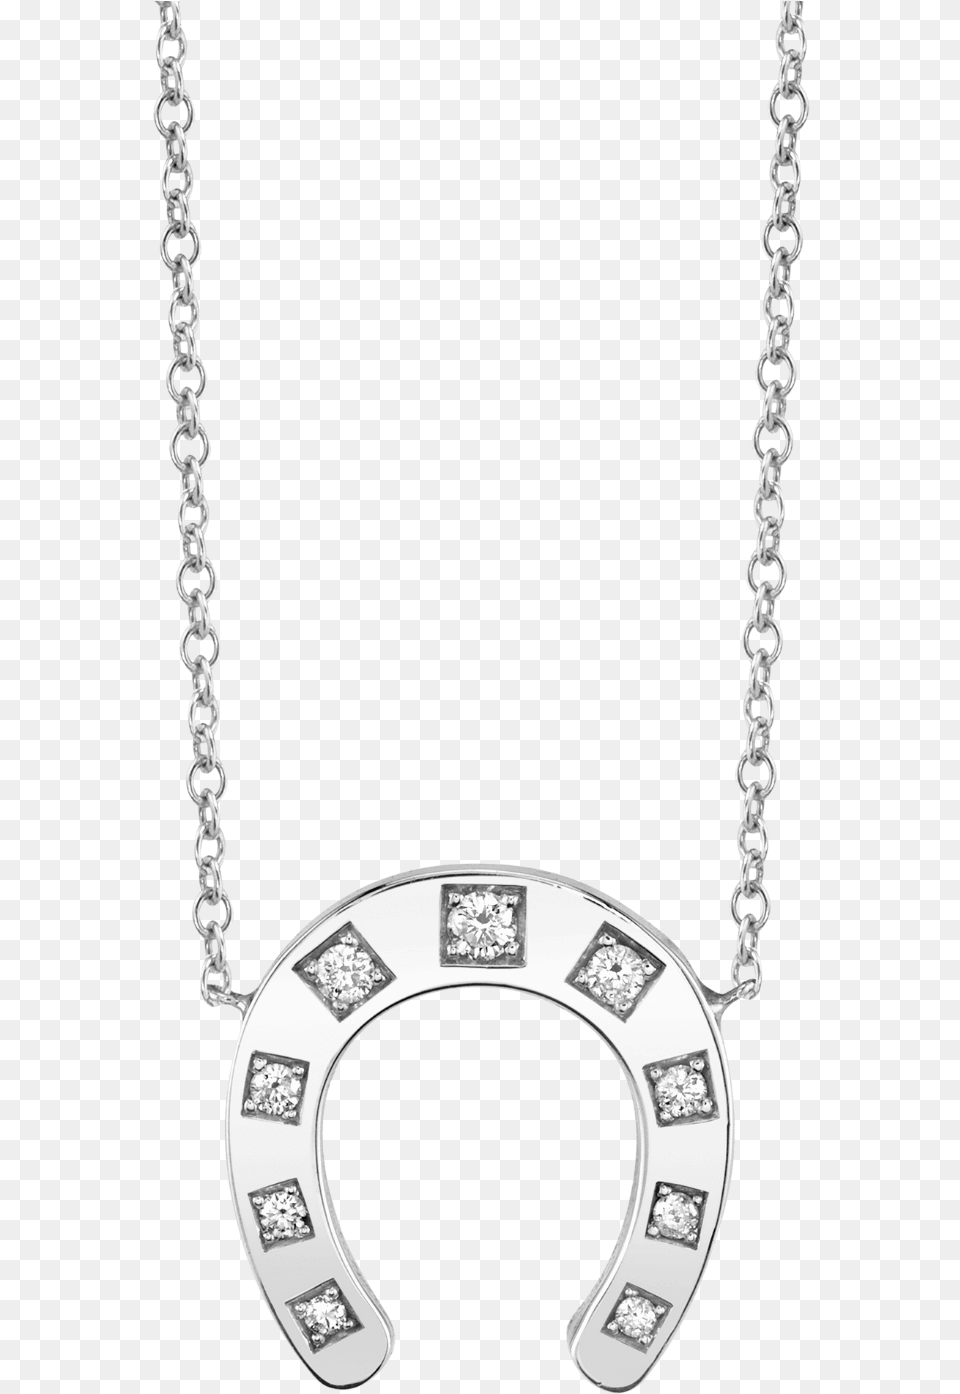 Horseshoe Necklace Chain, Accessories, Jewelry, Diamond, Gemstone Png